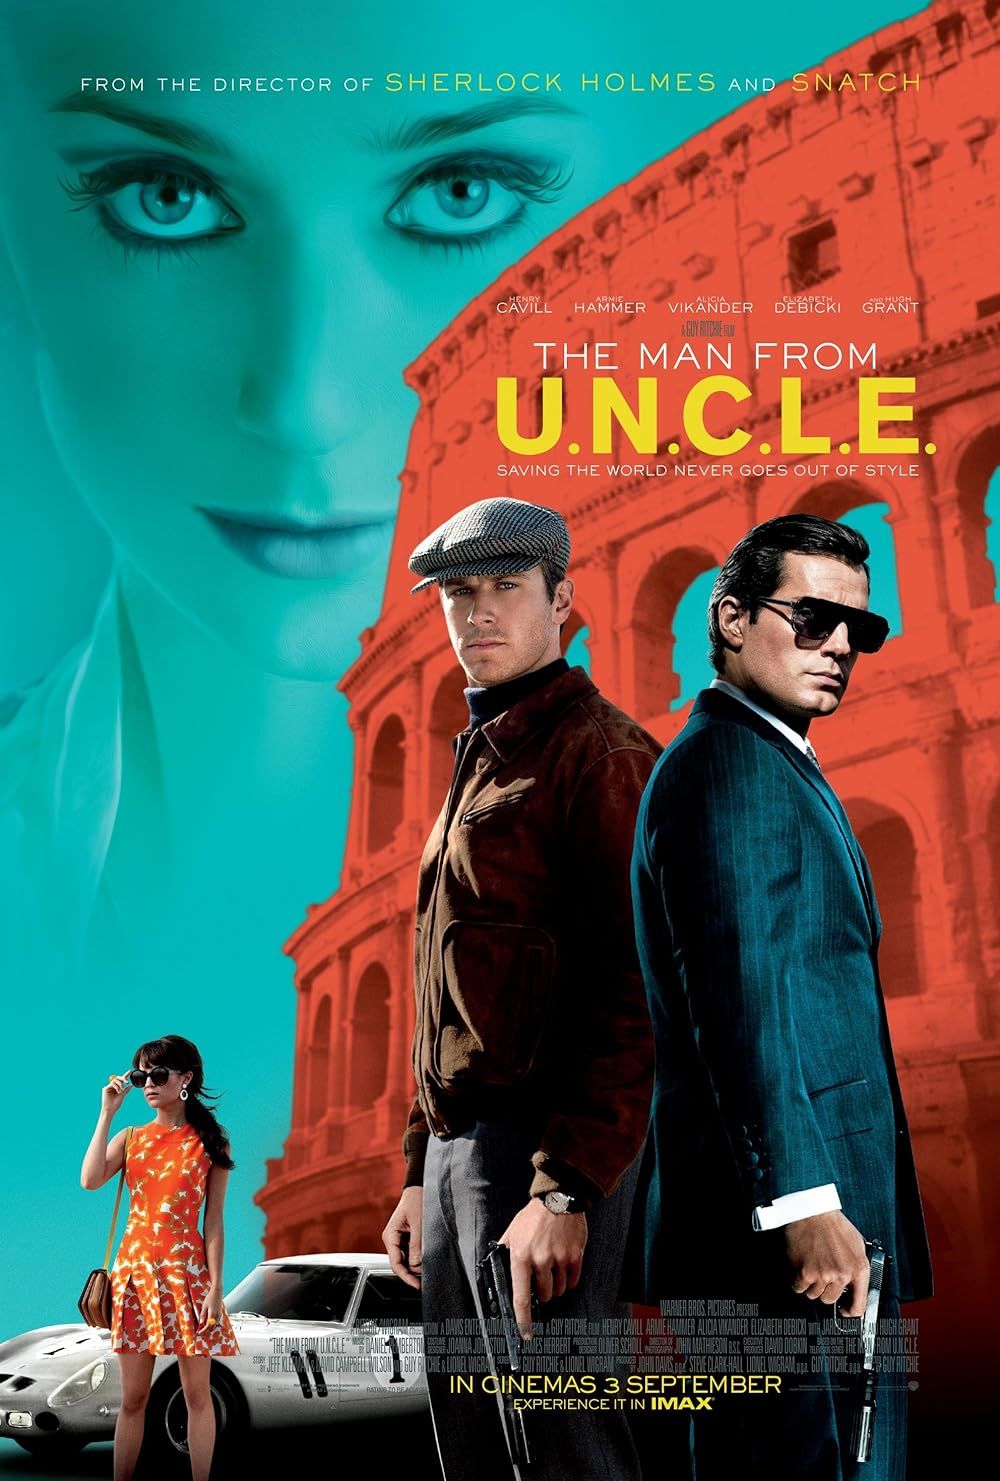 The Man From UNCLE poster